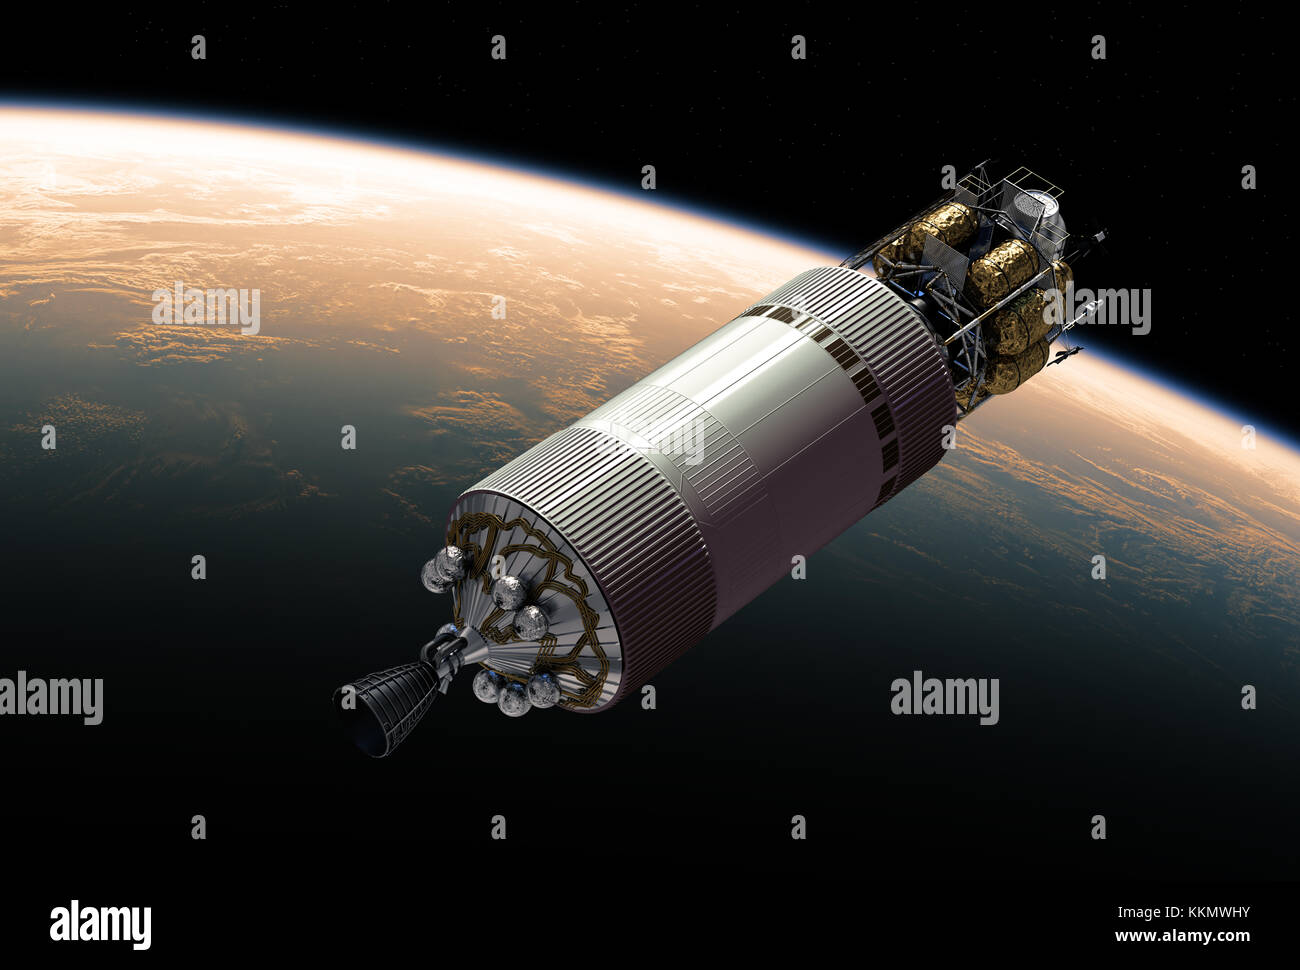 Crew Exploration Vehicle In Outer Space. 3D Illustration. Stock Photo